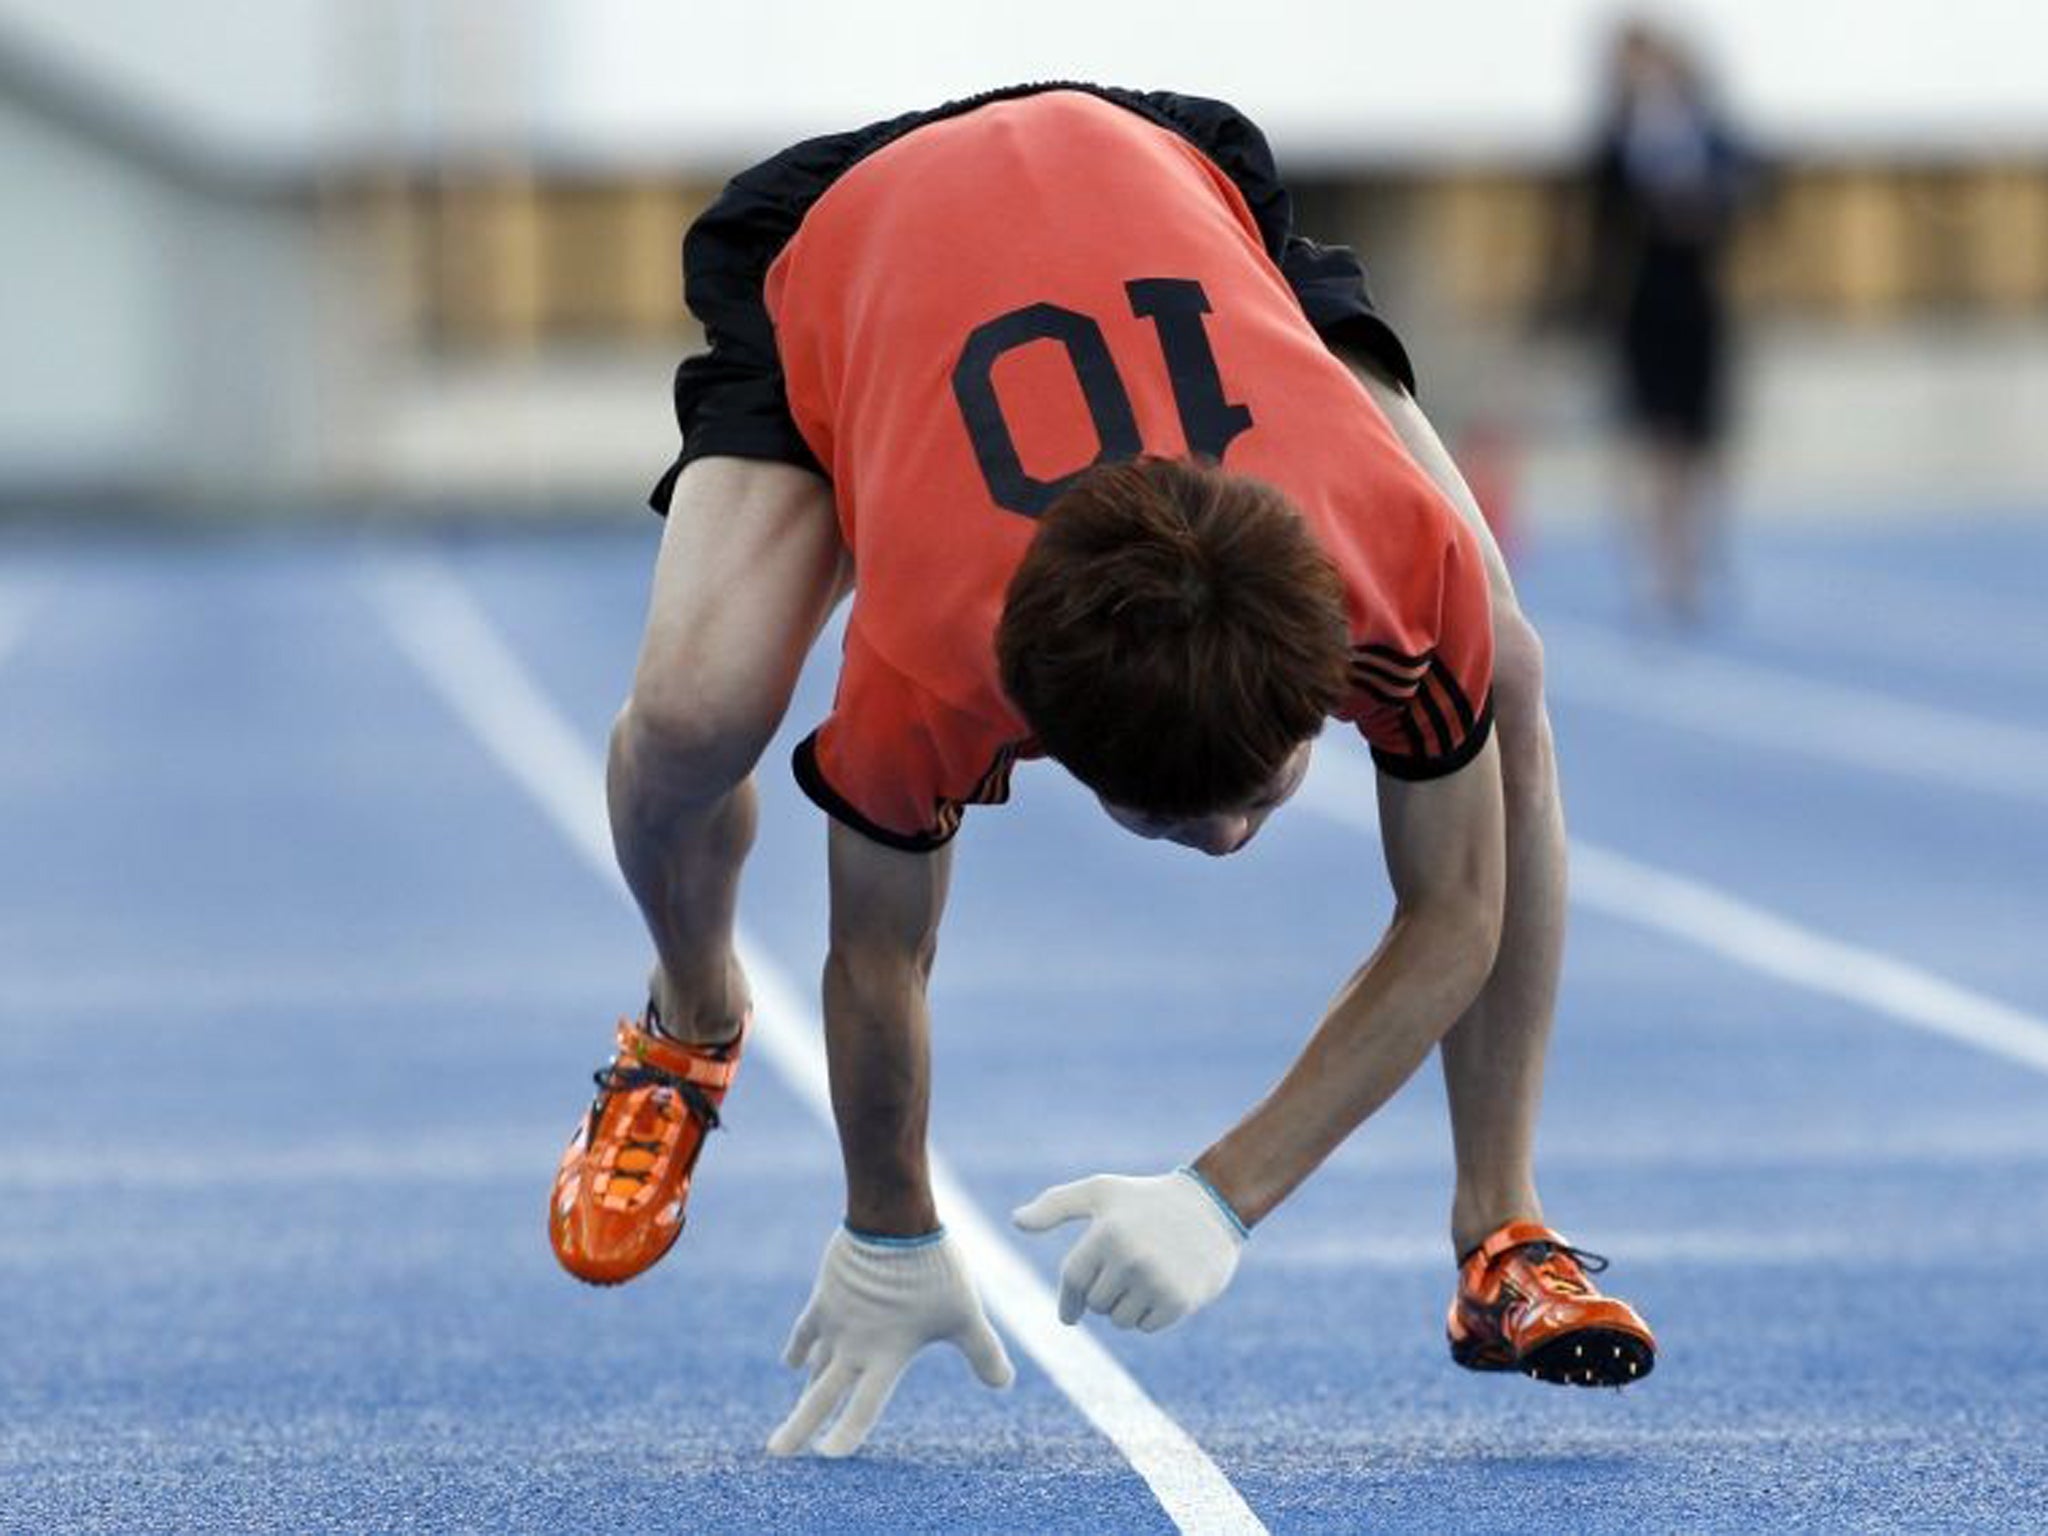 Kenichi Ito runs on a race course on his way to setting the Guinness World Record for the fastest time to run 100 metres on all fours